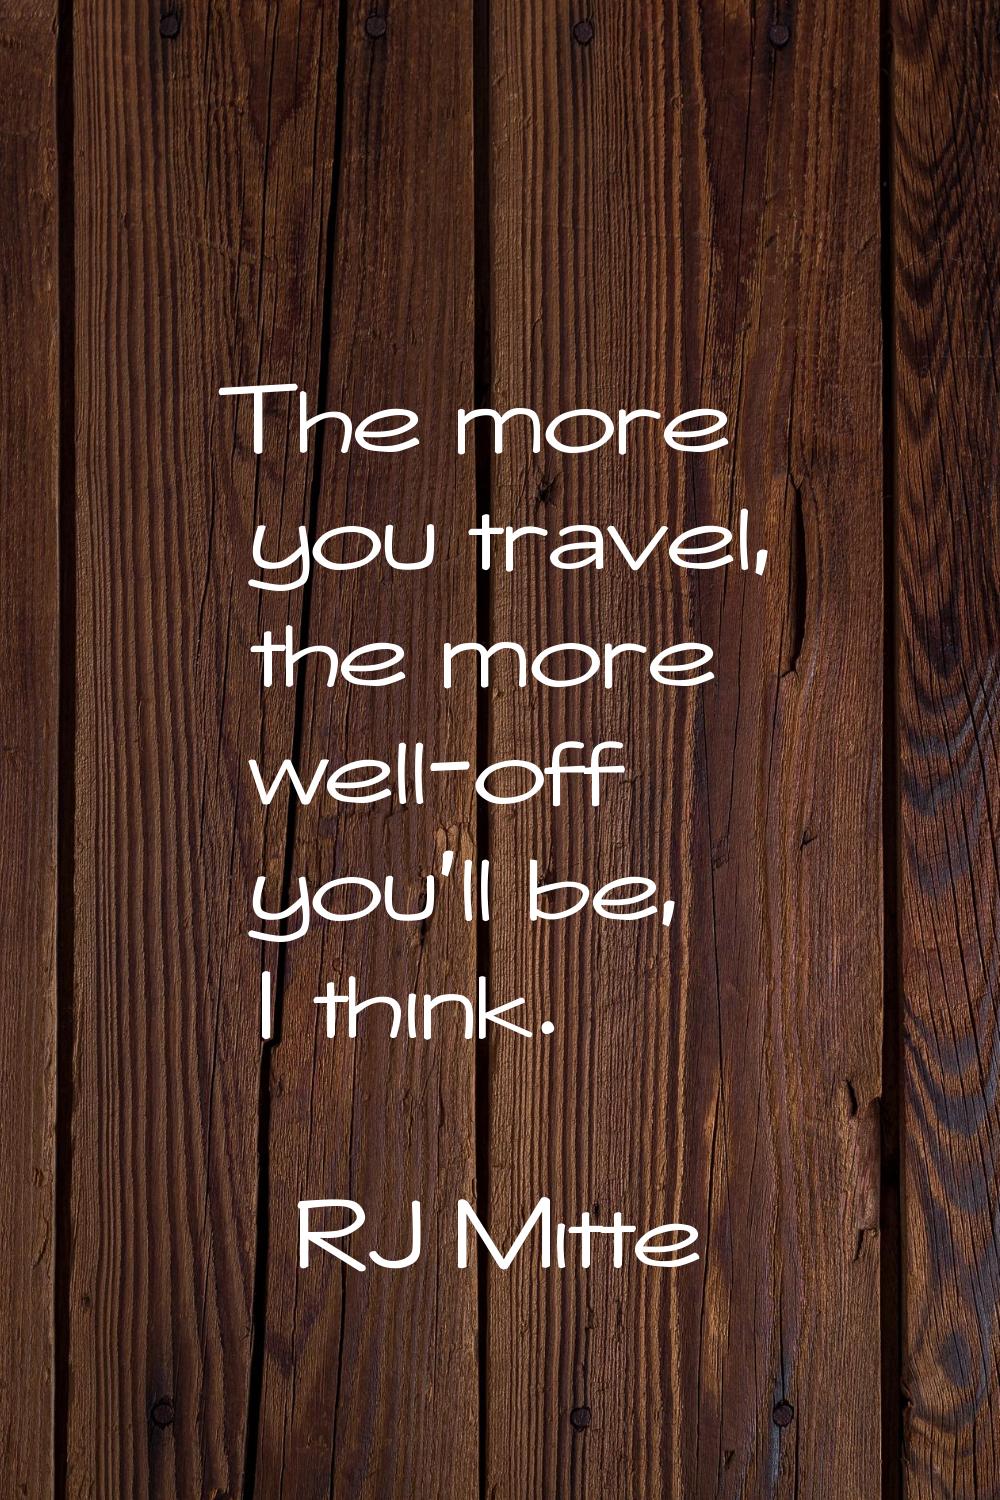 The more you travel, the more well-off you'll be, I think.